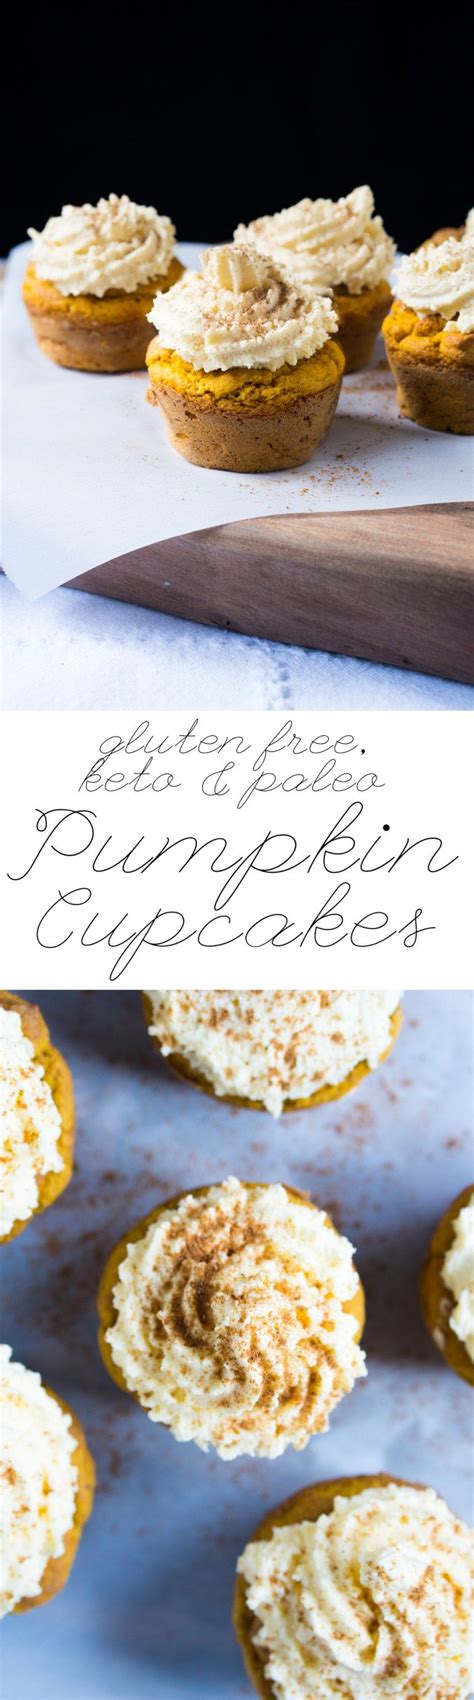 Healthy keto dessert recipes that can also be dairy free, gluten free, egg free, low carb, sugar free, paleo, no bake, and vegan! Gluten Free, Paleo & Keto Pumpkin Cupcakes 🎃 | Low carb sweets, Low carb desserts, Low carb keto ...